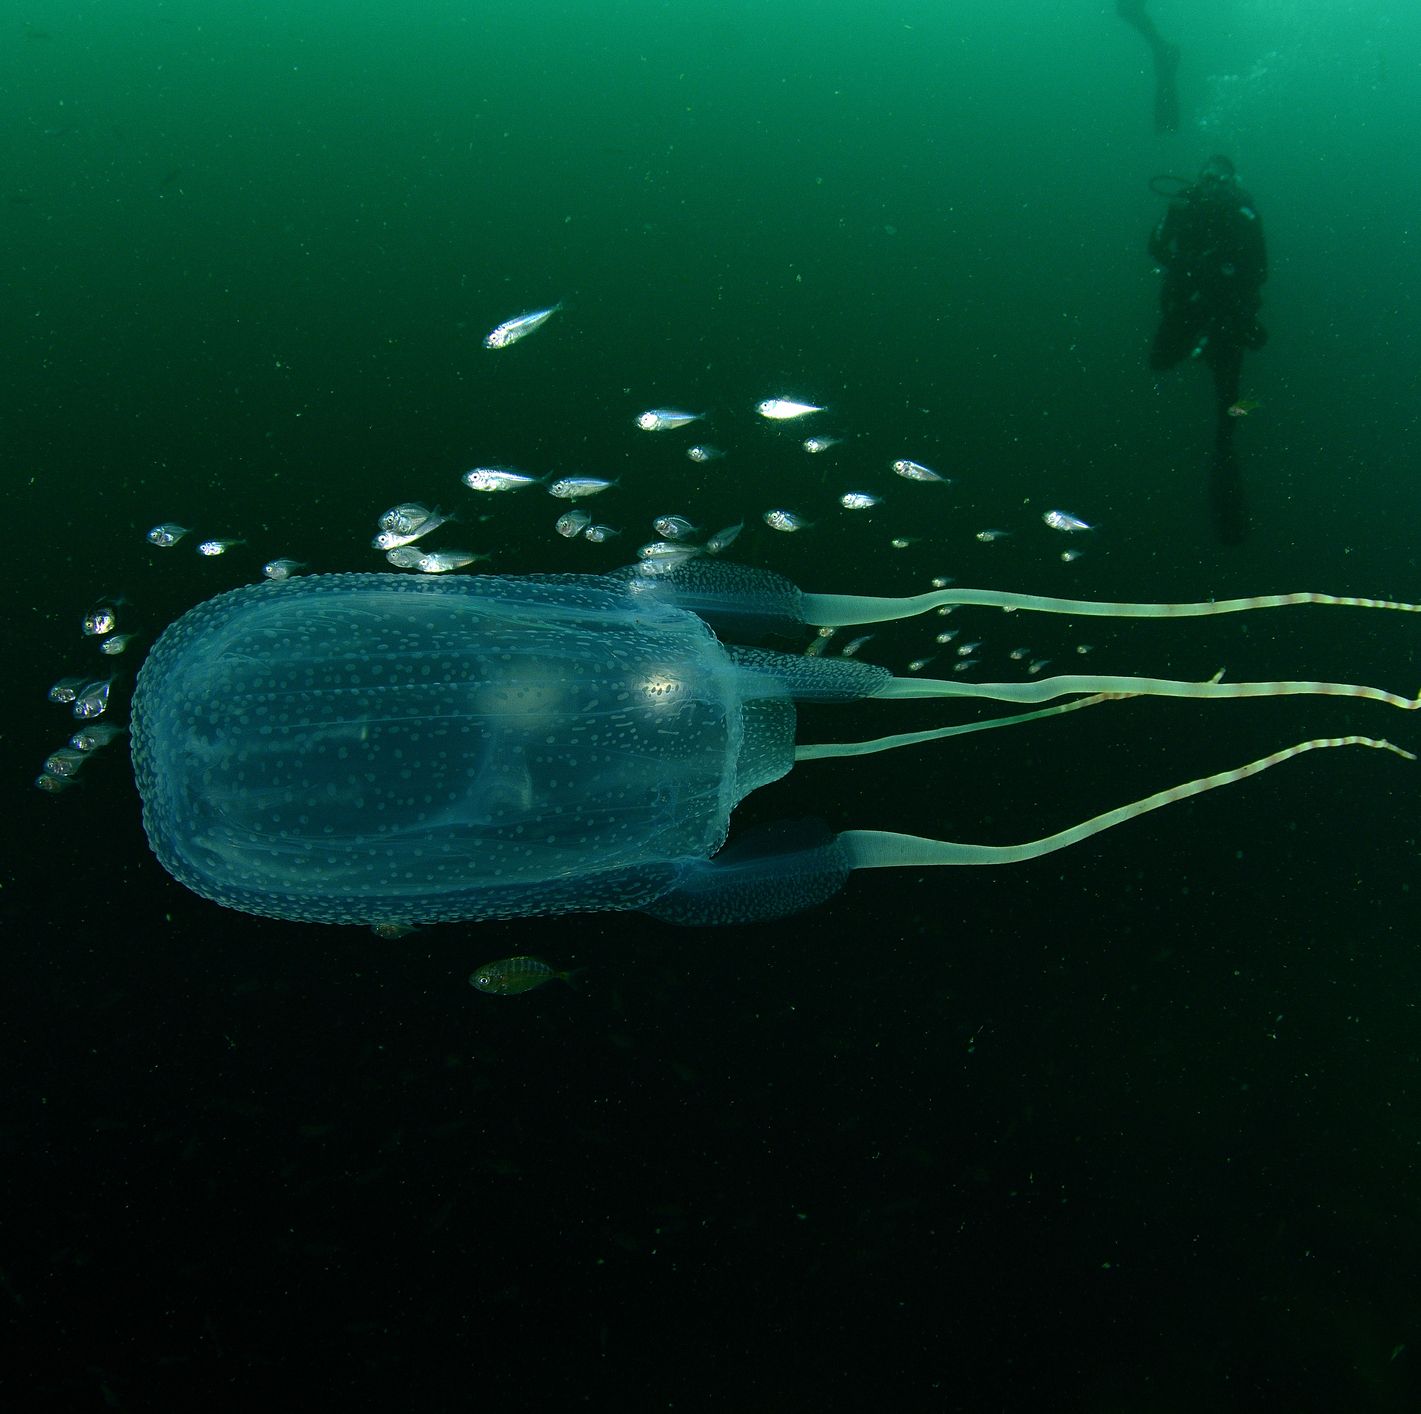 These Deadly Jellyfish Could Help Us Understand Our Own Brains